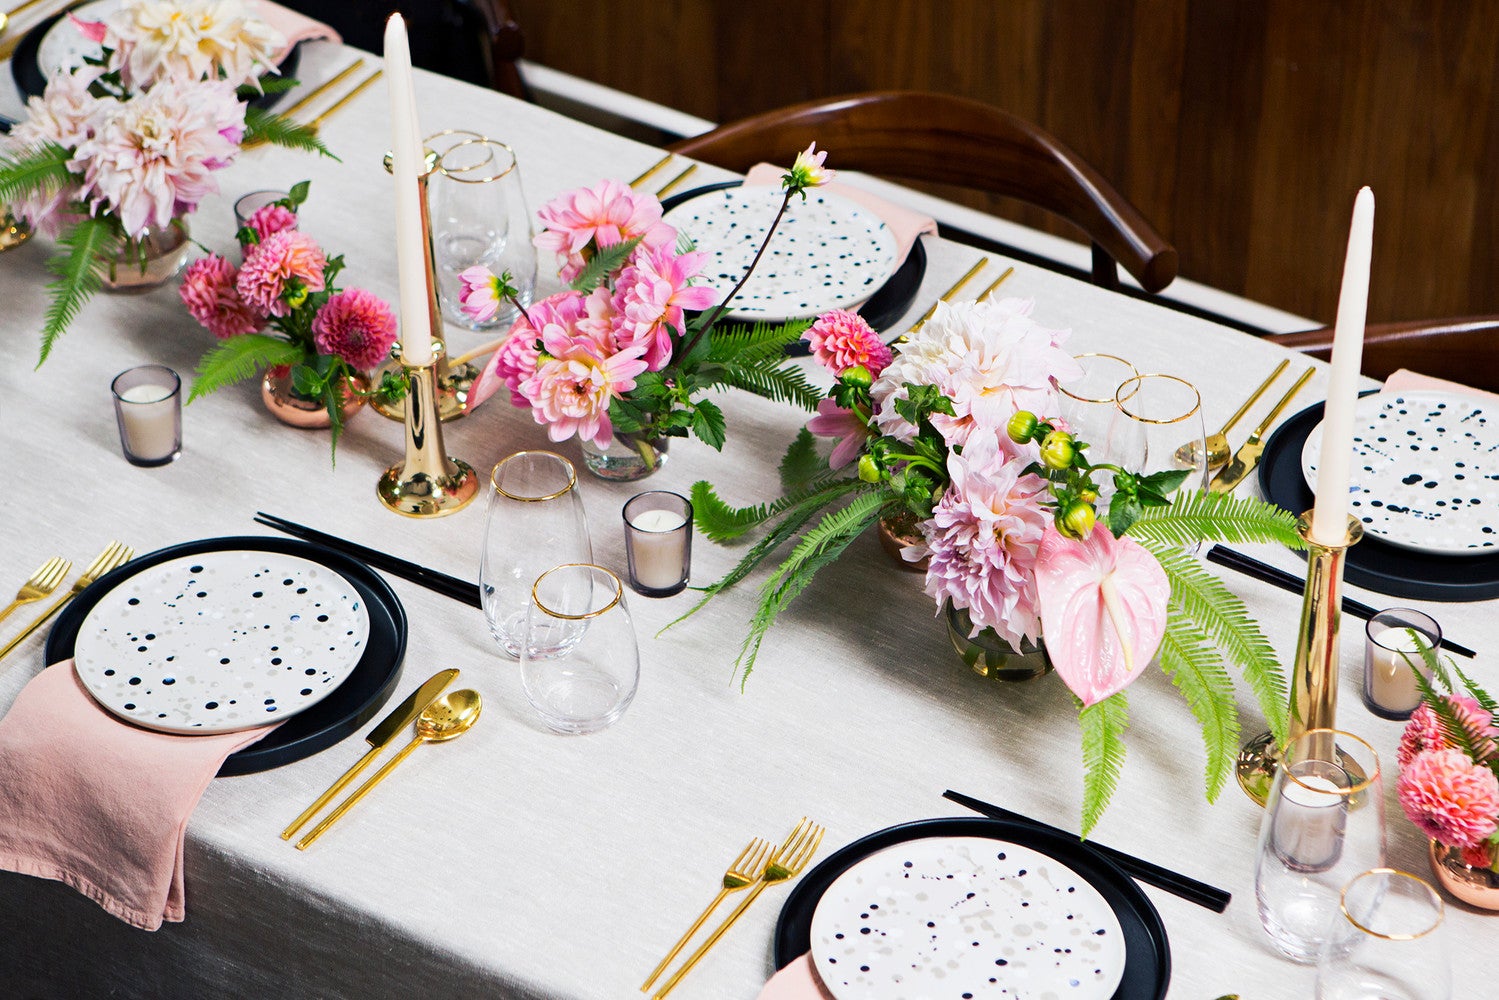 How to Throw an Epic Dinner Party in 12 Hours: Making Your Space Party Ready From 8 to 8